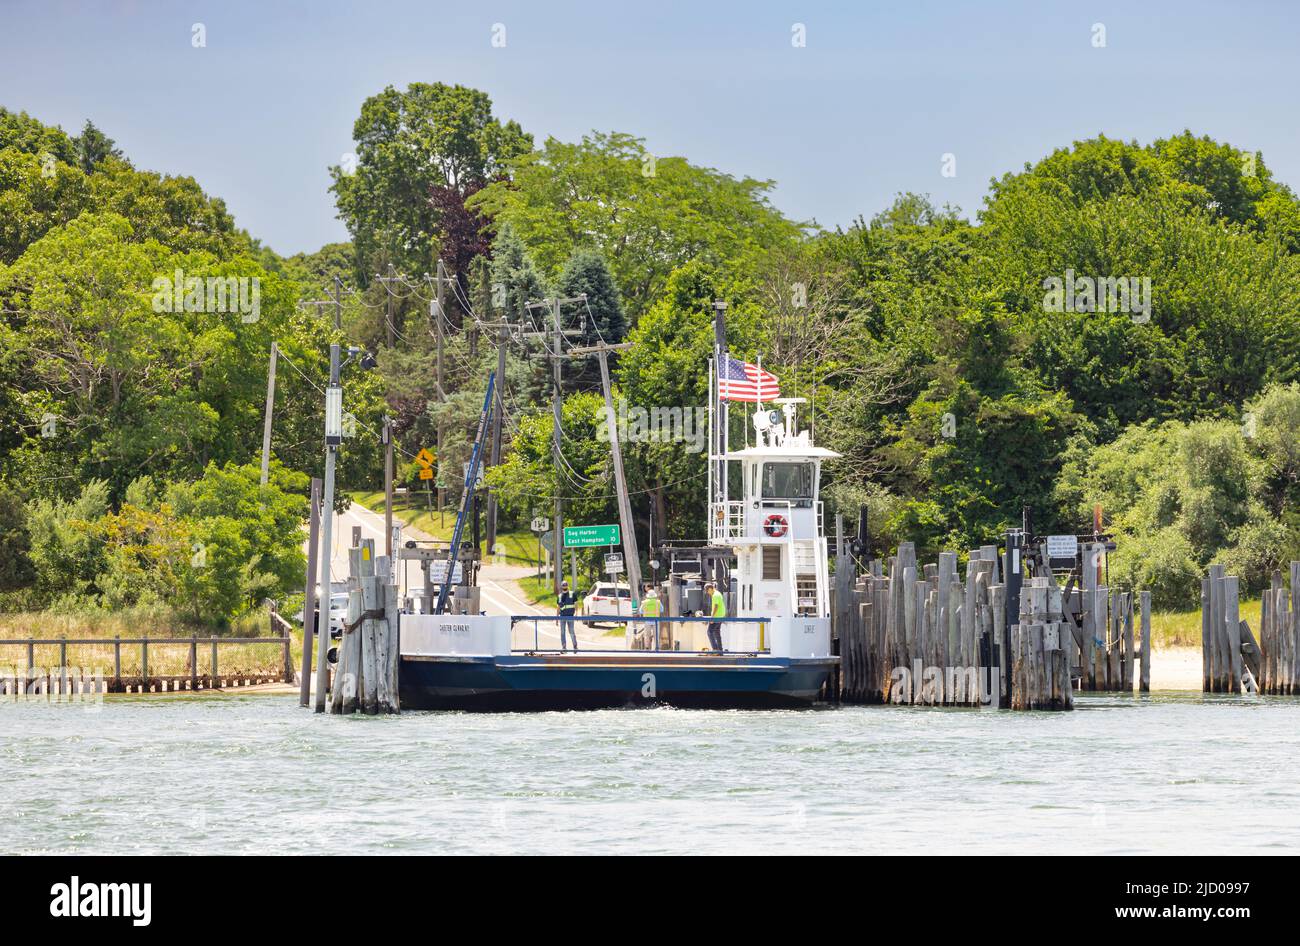 Shelter Island South Ferry, Sonnenaufgang im Dock in North Haven, NY Stockfoto